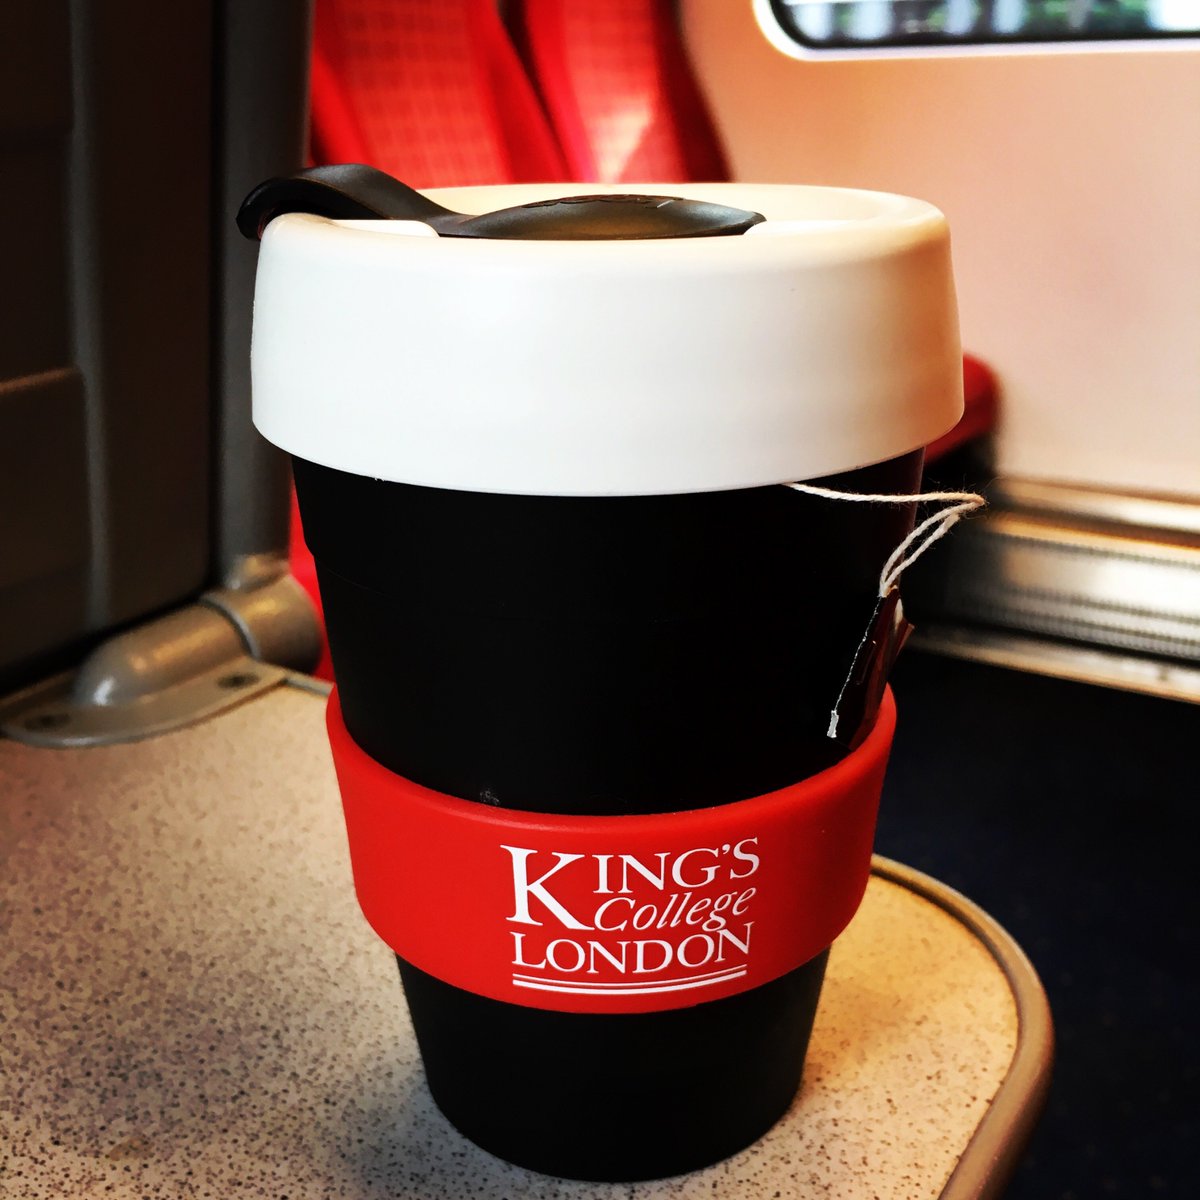 Morning tea #communter #owncup #ritazza #southwesttrains #reducereuserecycle